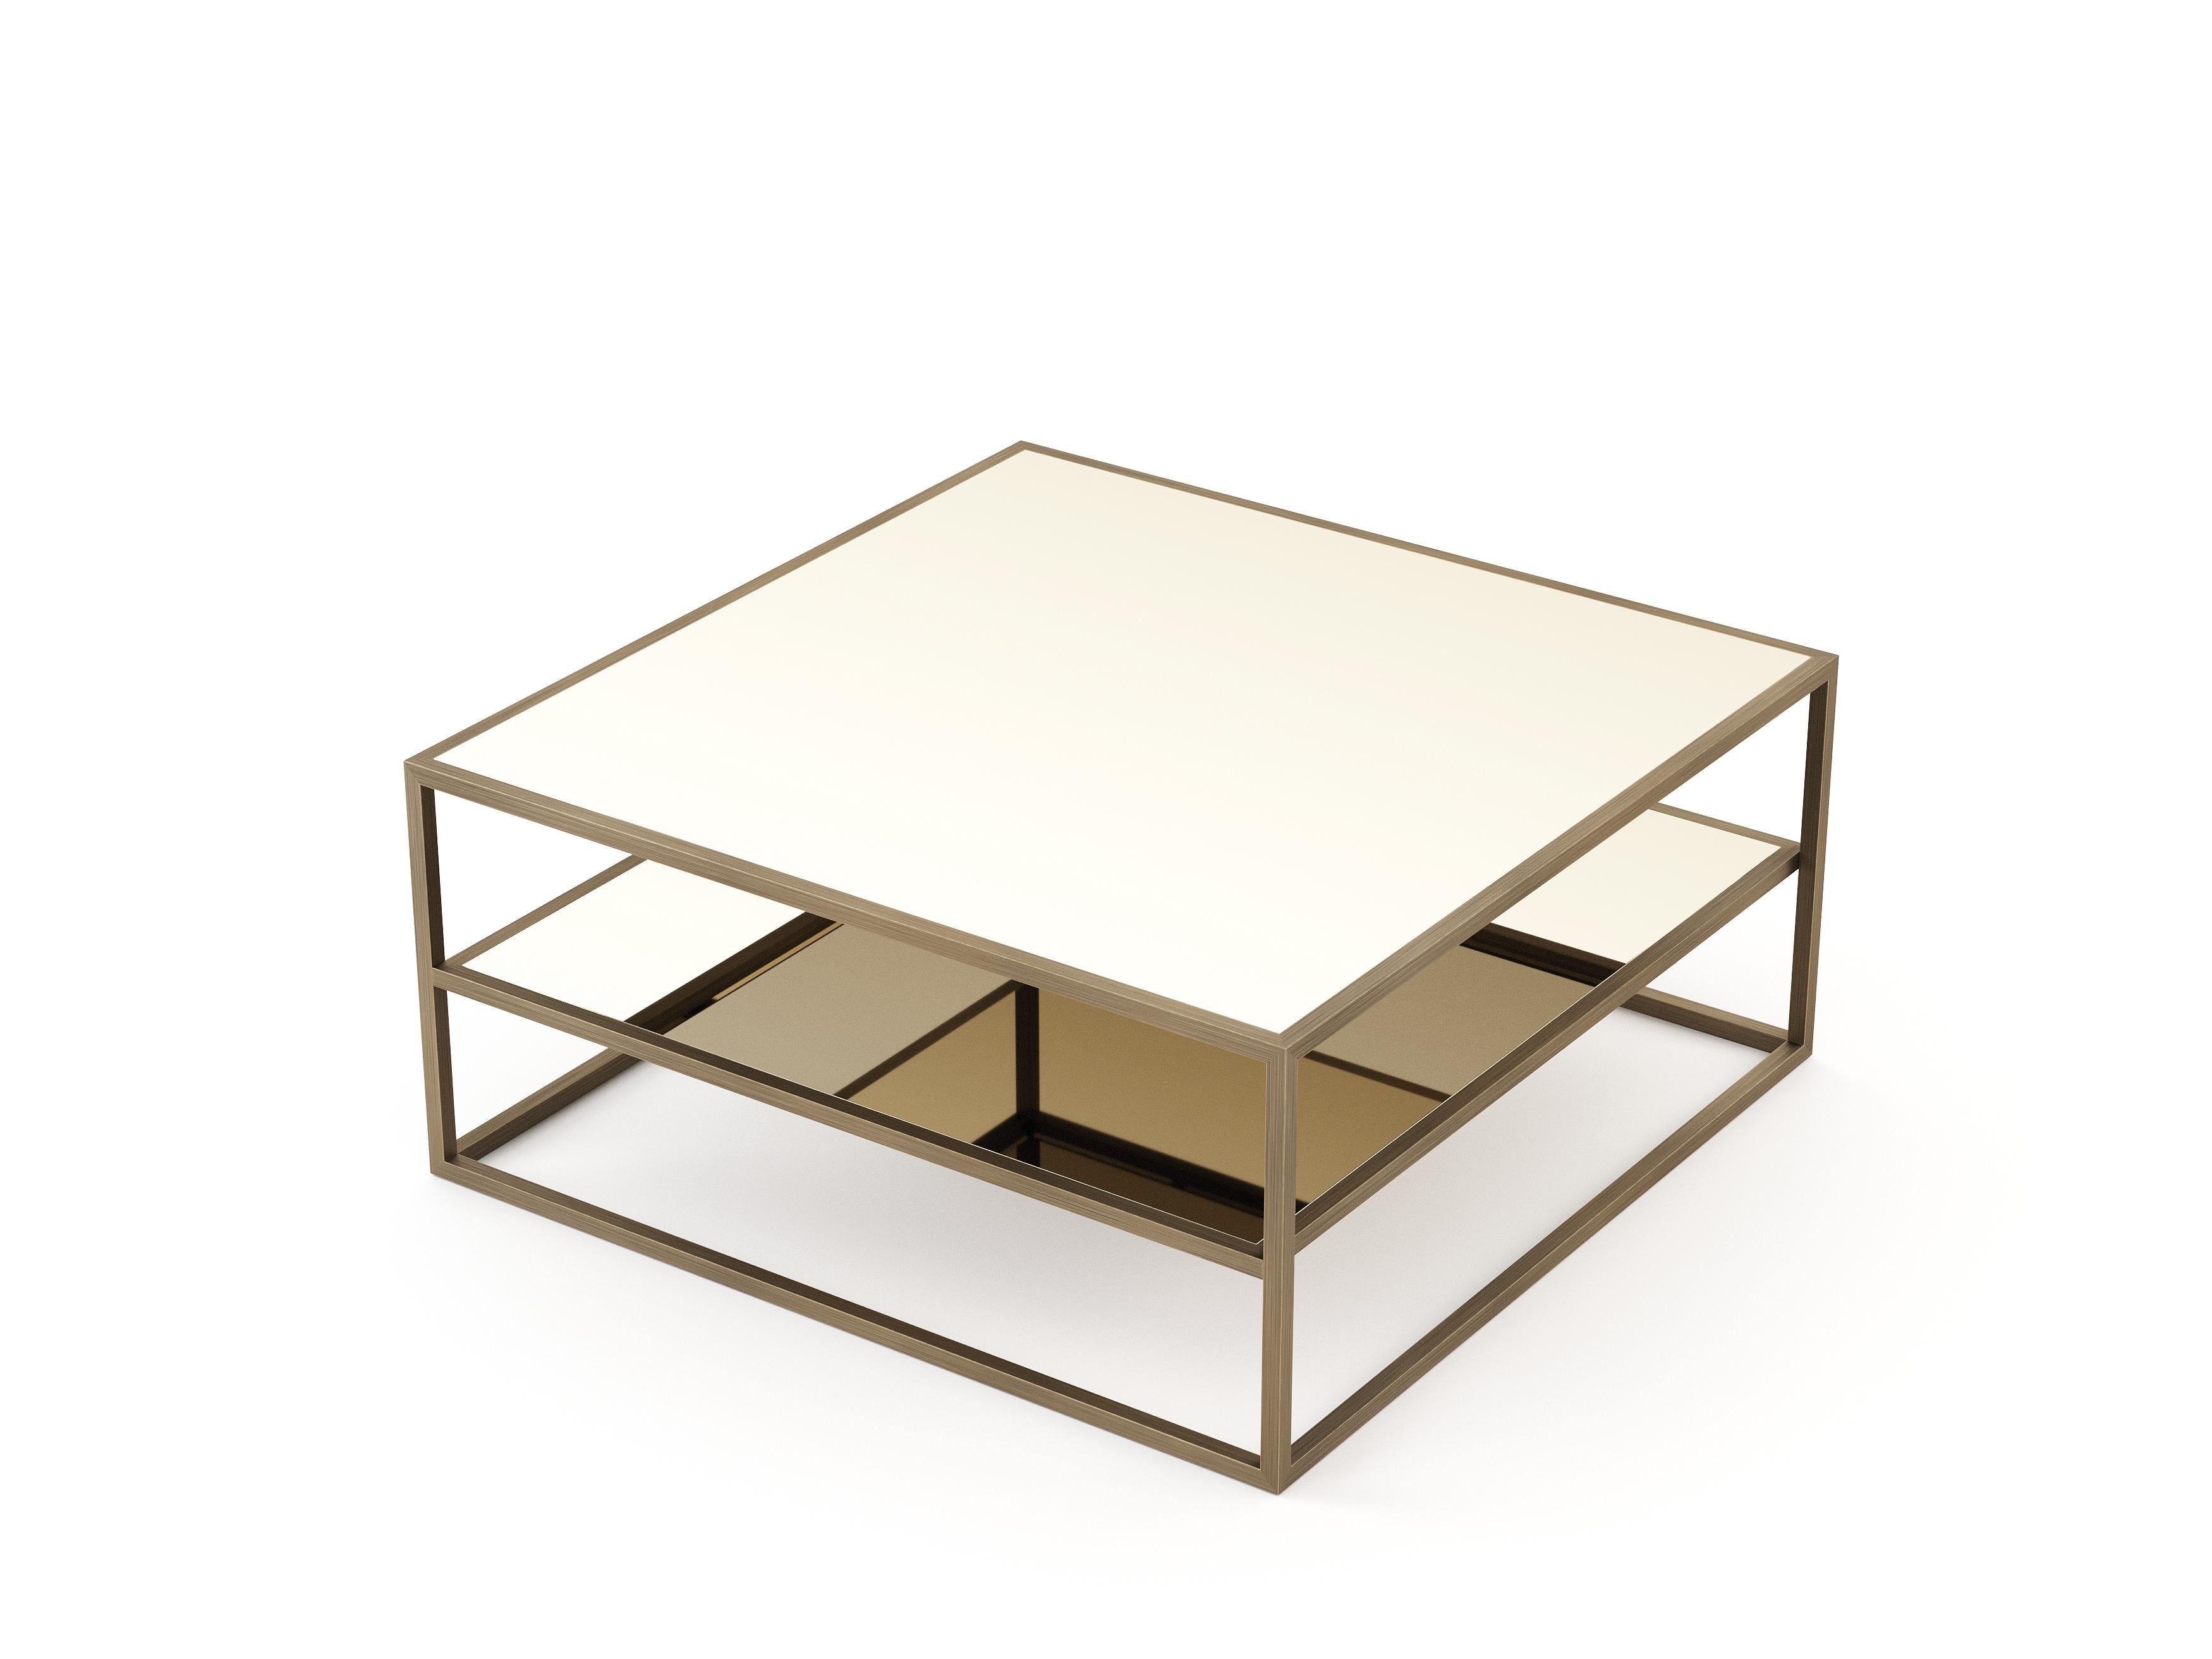 Portuguese Modern style Bridge Coffee Table made with brass and glass, Handmade For Sale